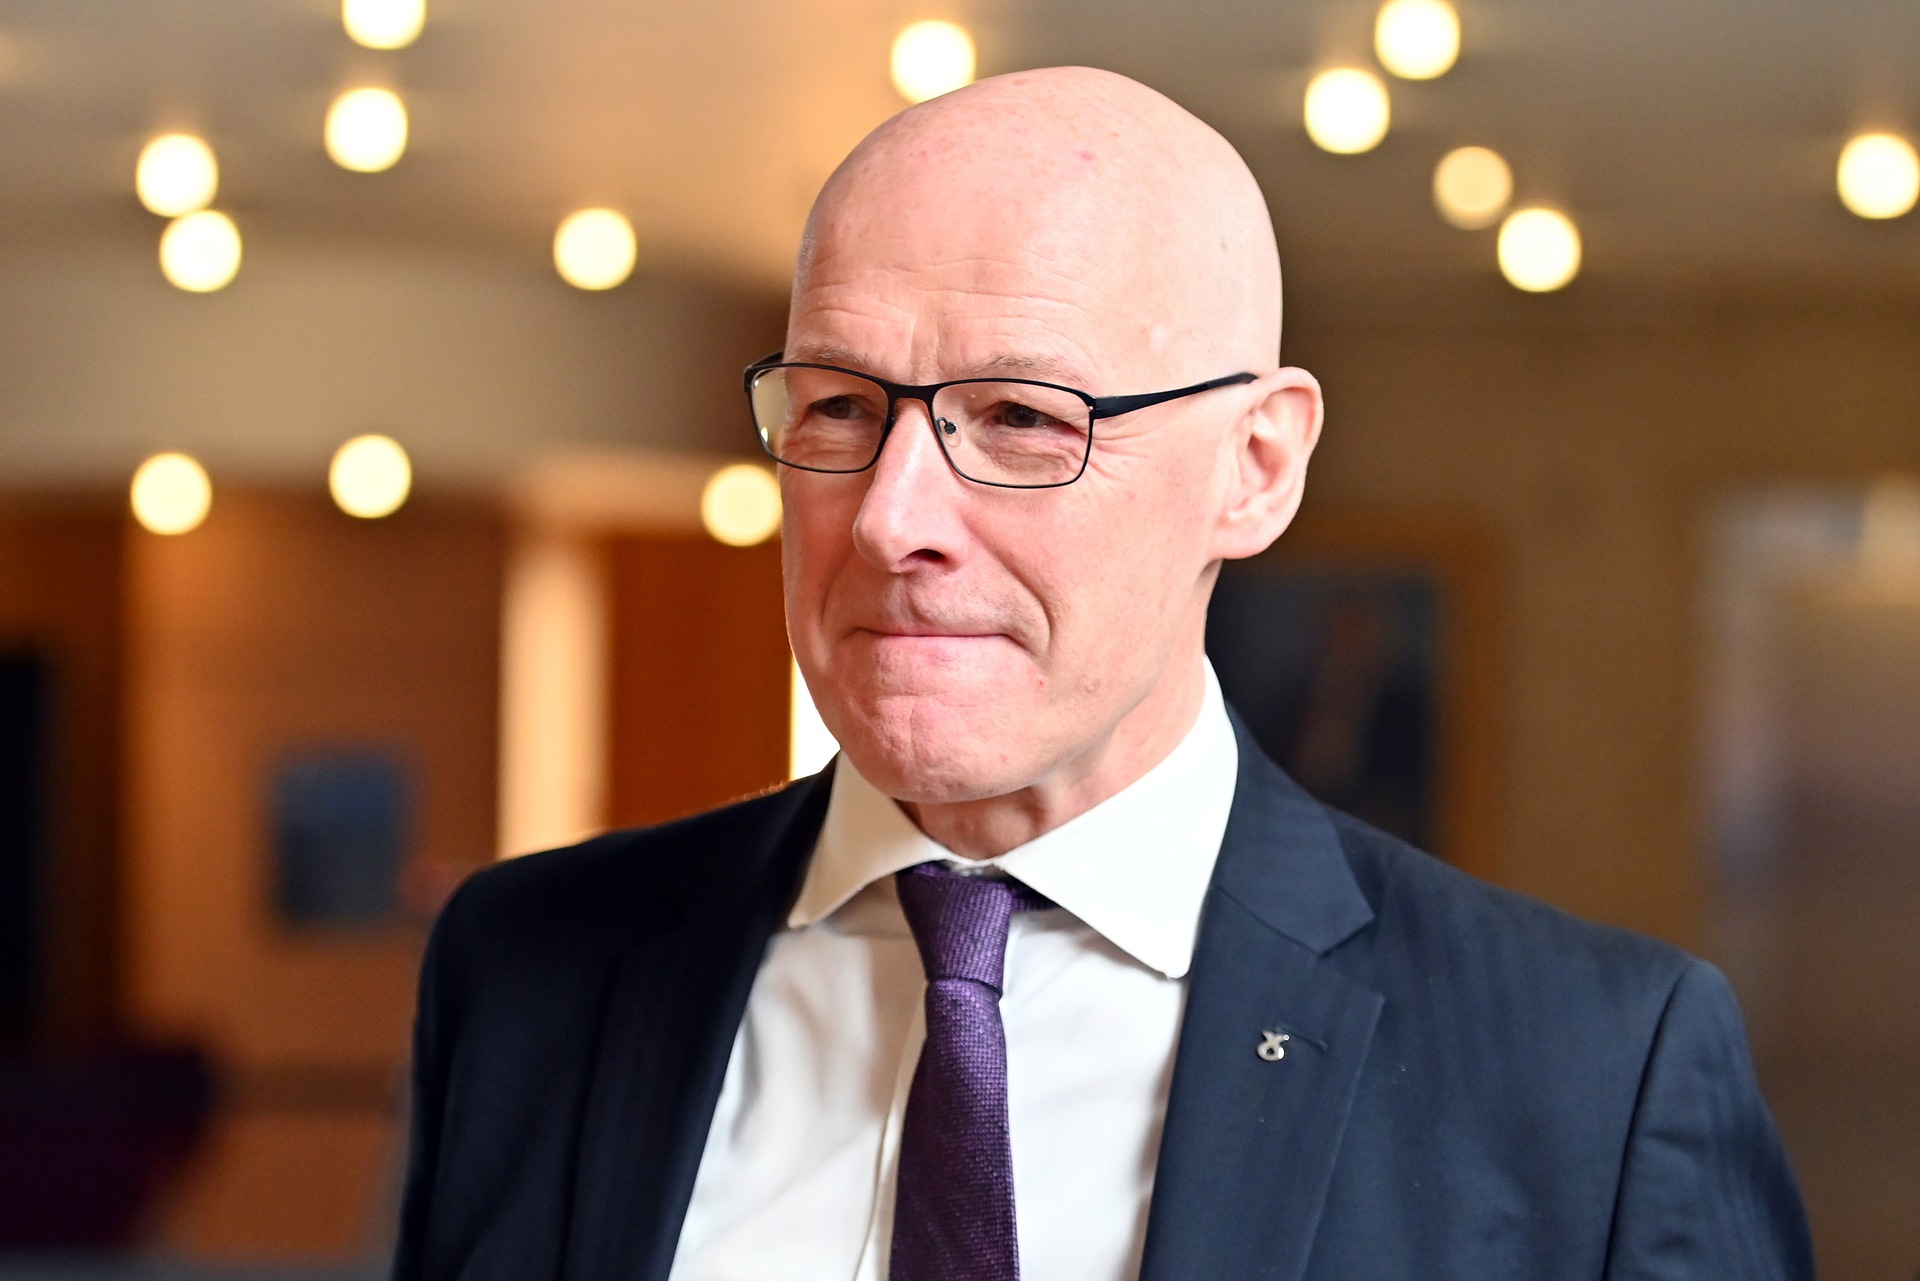 John Swinney has suggested he could run despite ruling himself out at last year's election.